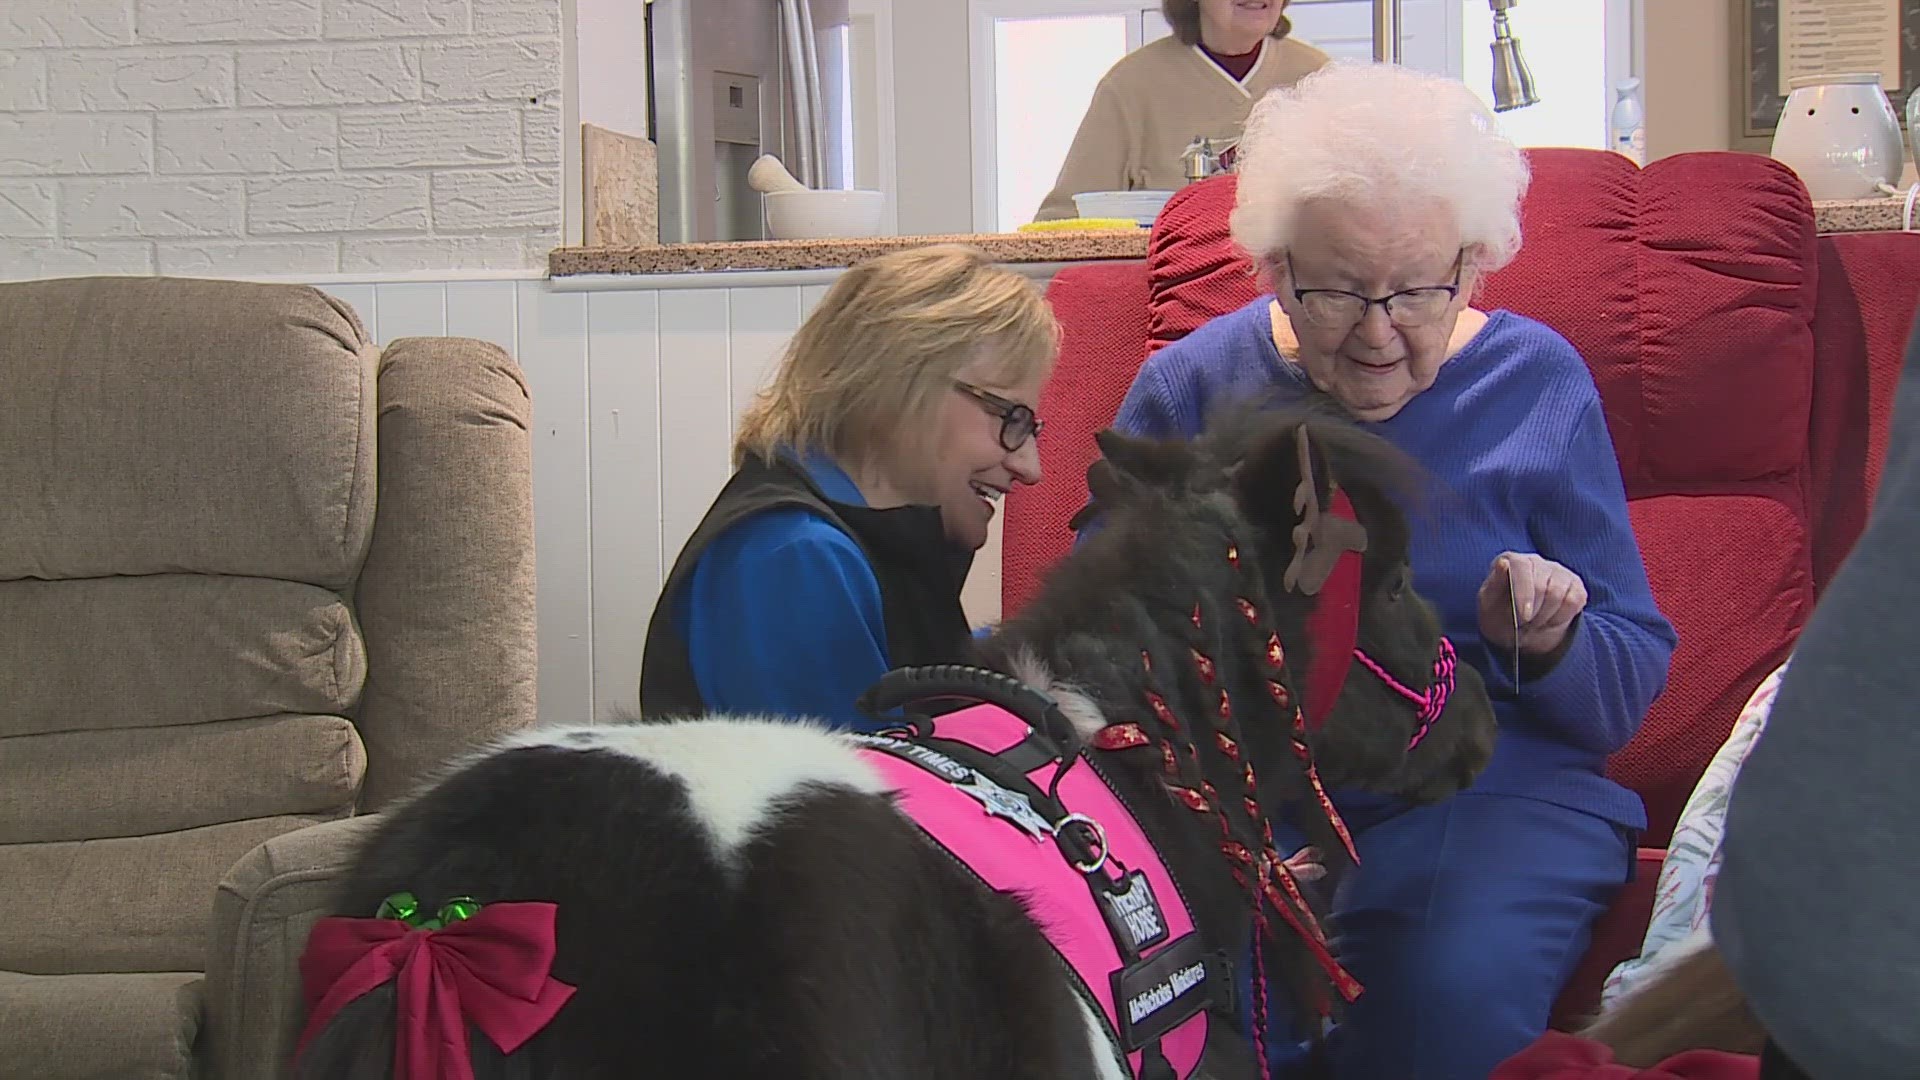 A mini horse therapy organization is bringing comfort to people in hospitals, nursing homes, disaster areas and at the National Western Stock Show.